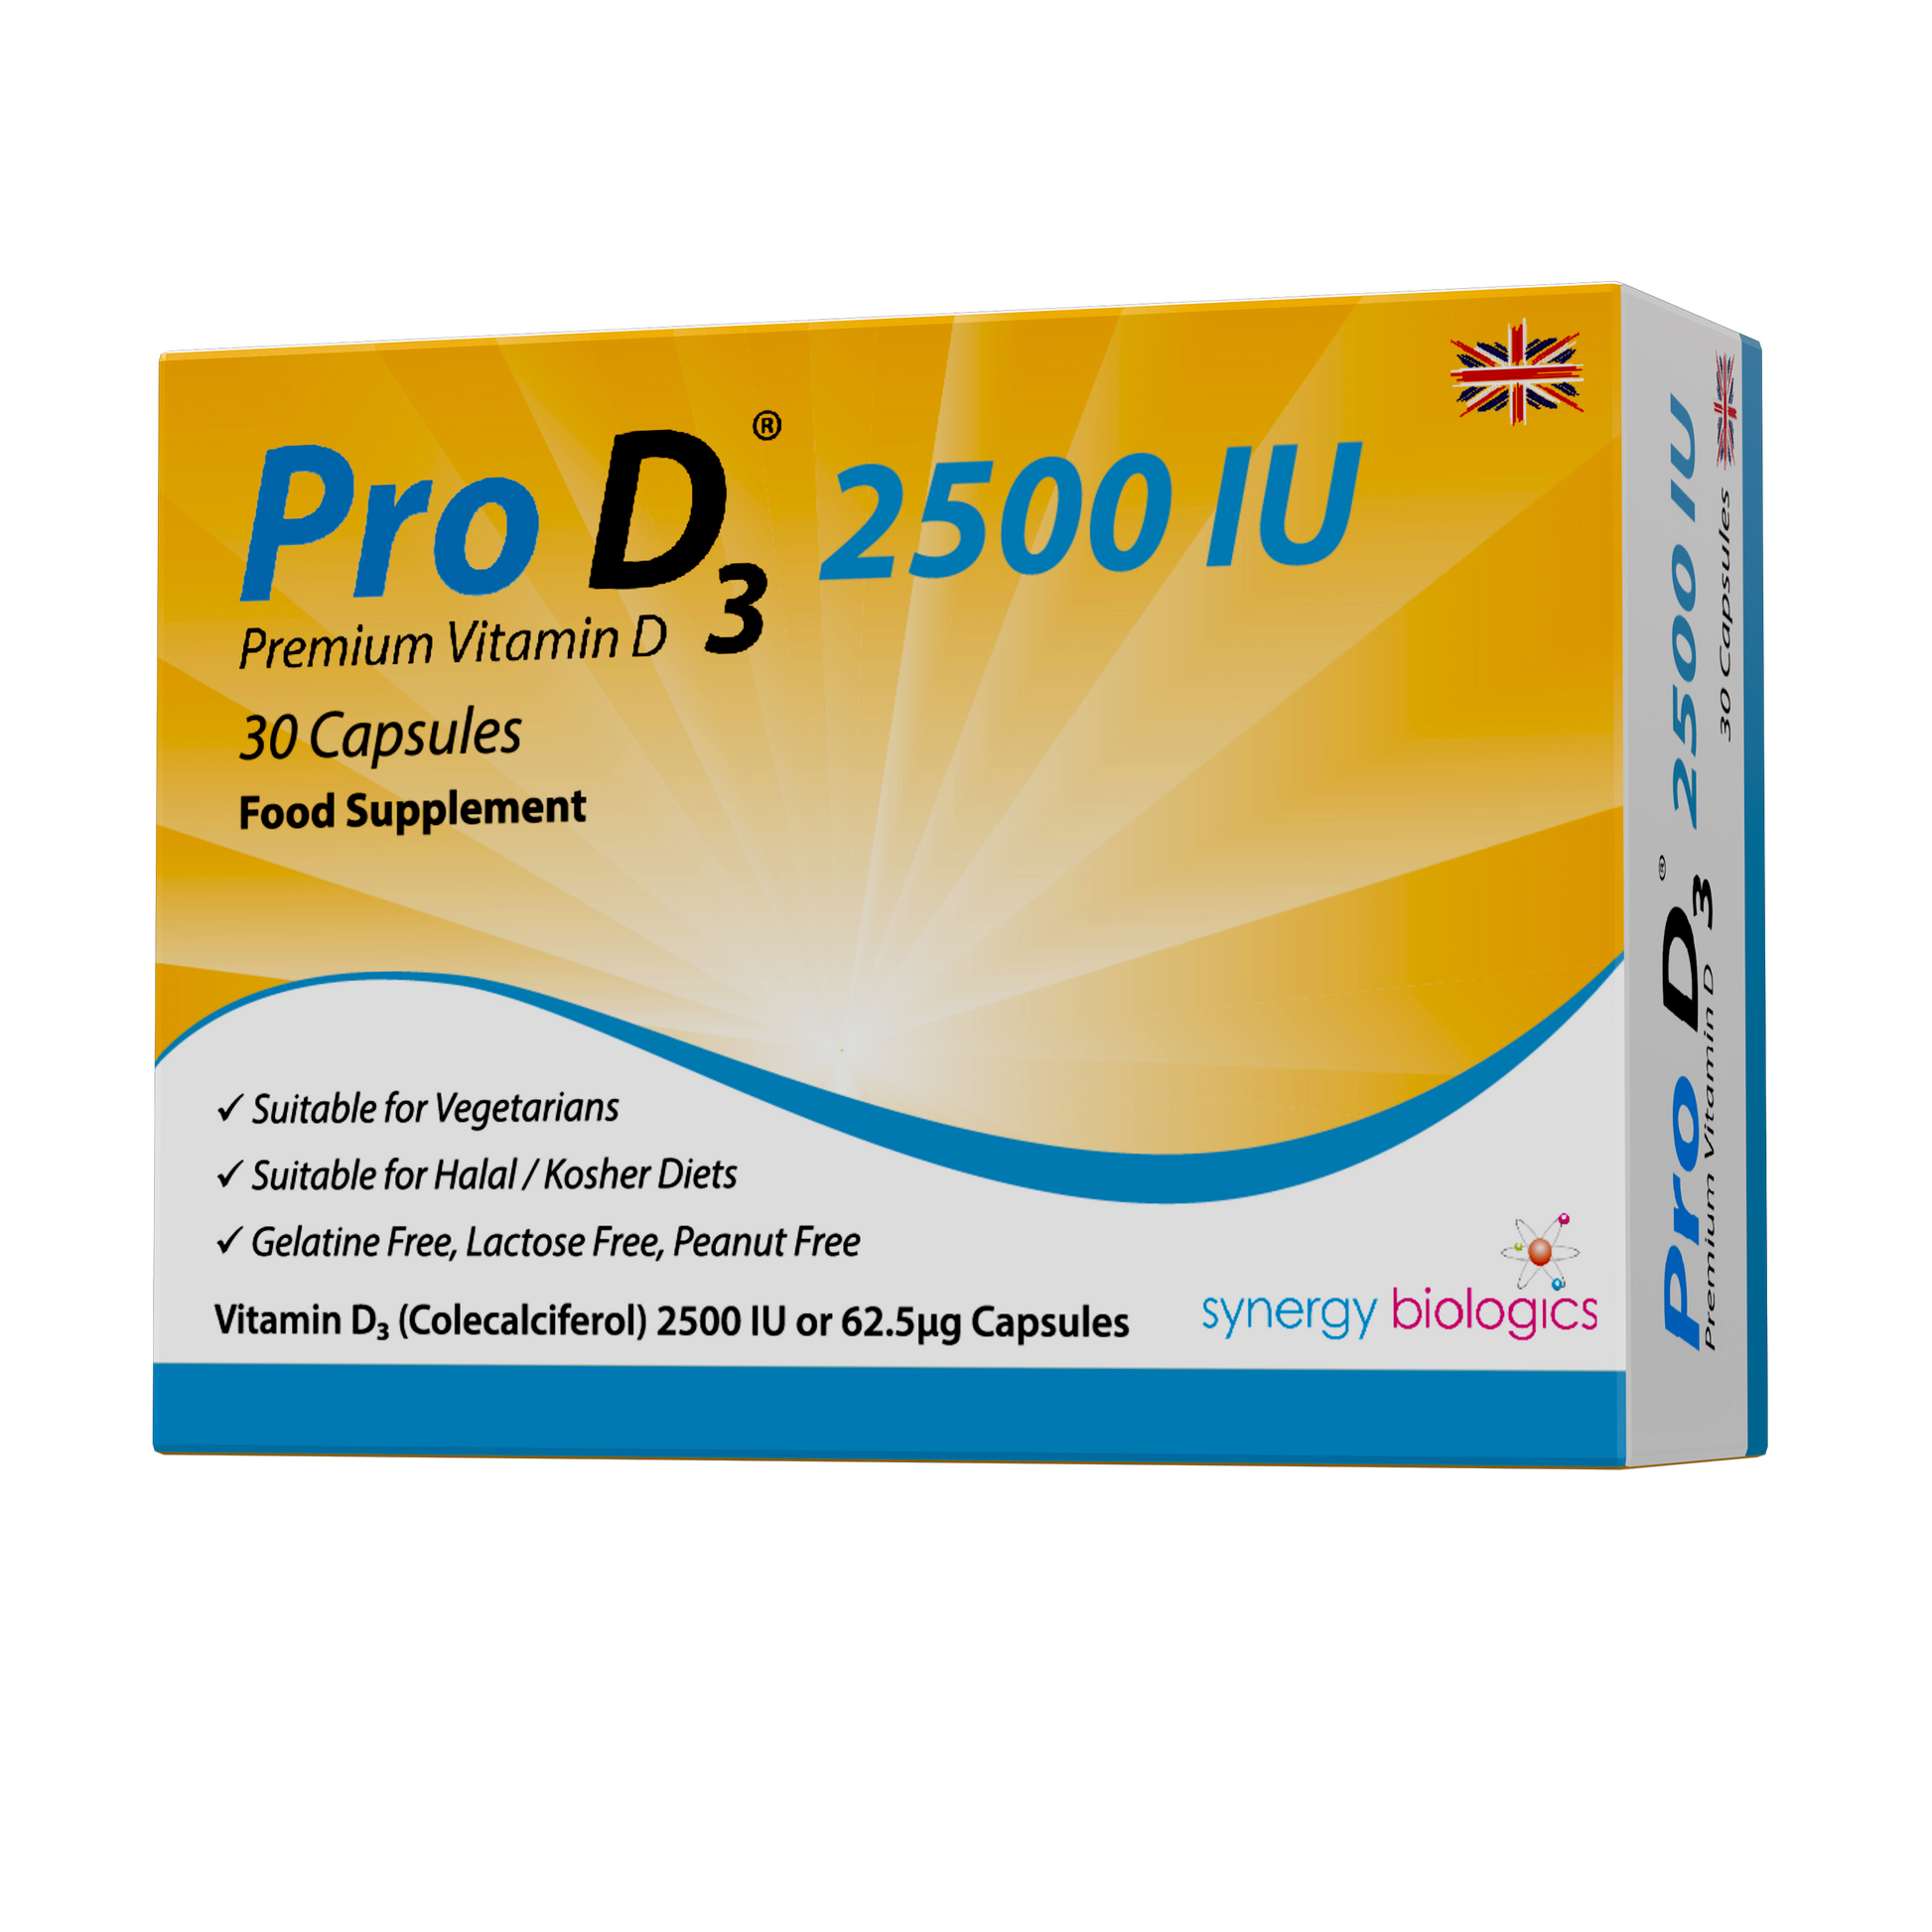 Pro D3 2500 IU Vitamin D3 30 Capsules - High-Potency UK Supplements for Immune Support and Wellbeing